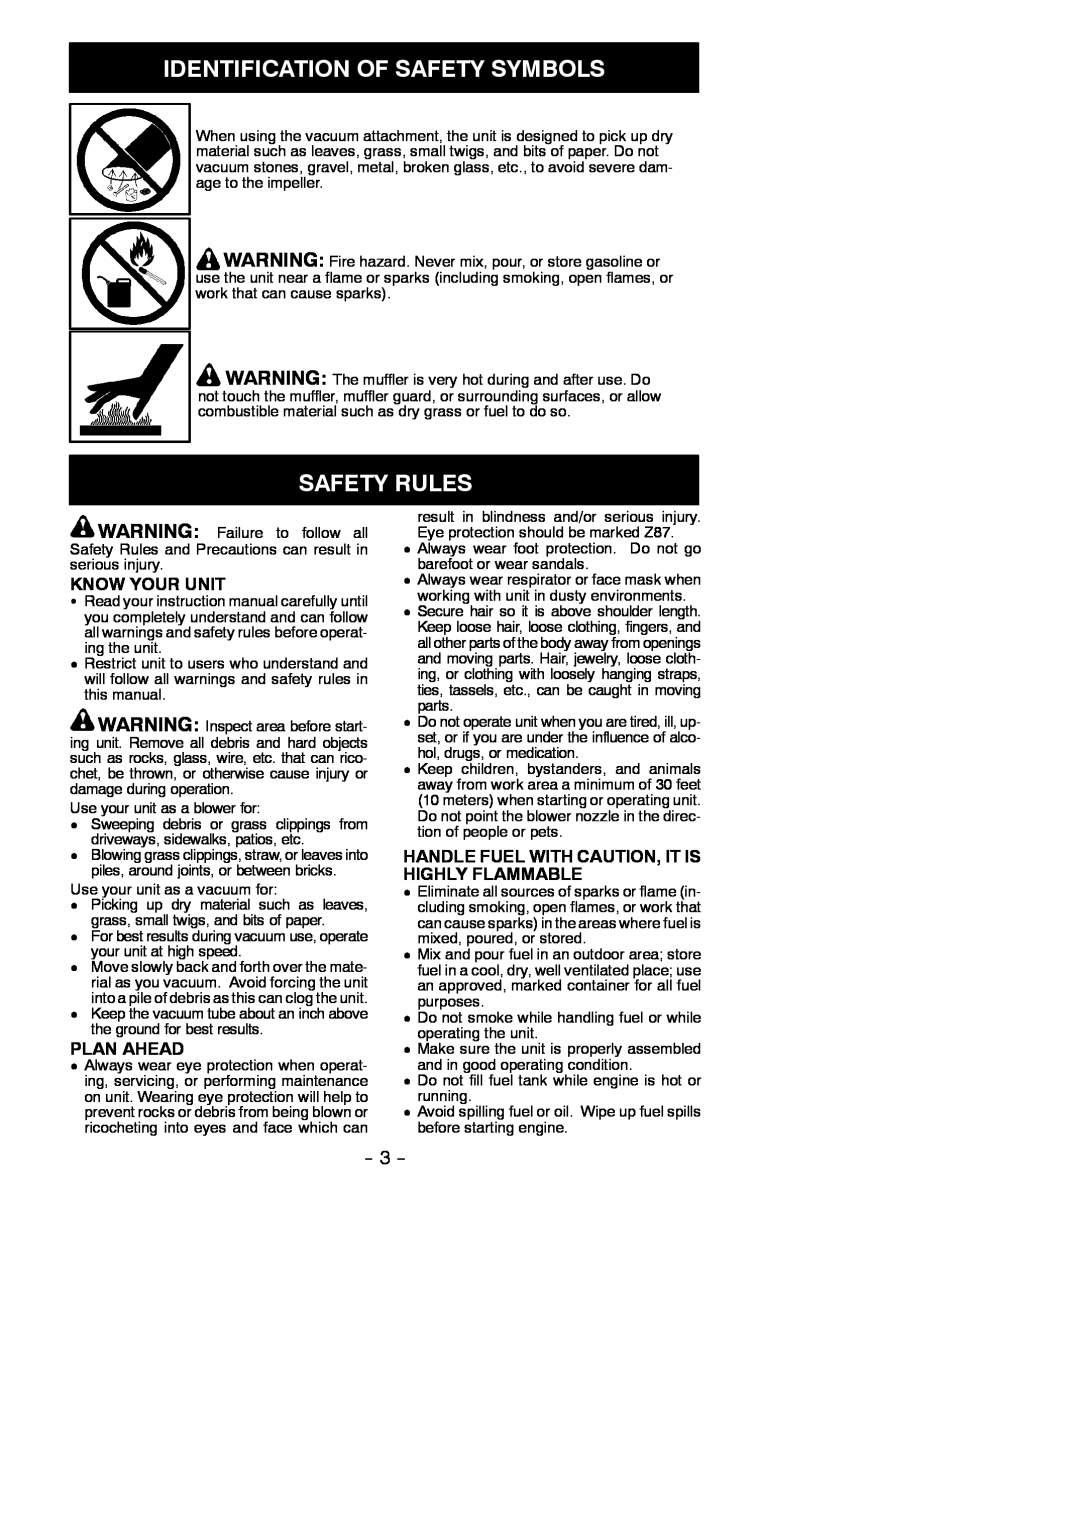 Poulan BVM210VS instruction manual Safety Rules, Identification Of Safety Symbols, Know Your Unit, Plan Ahead 